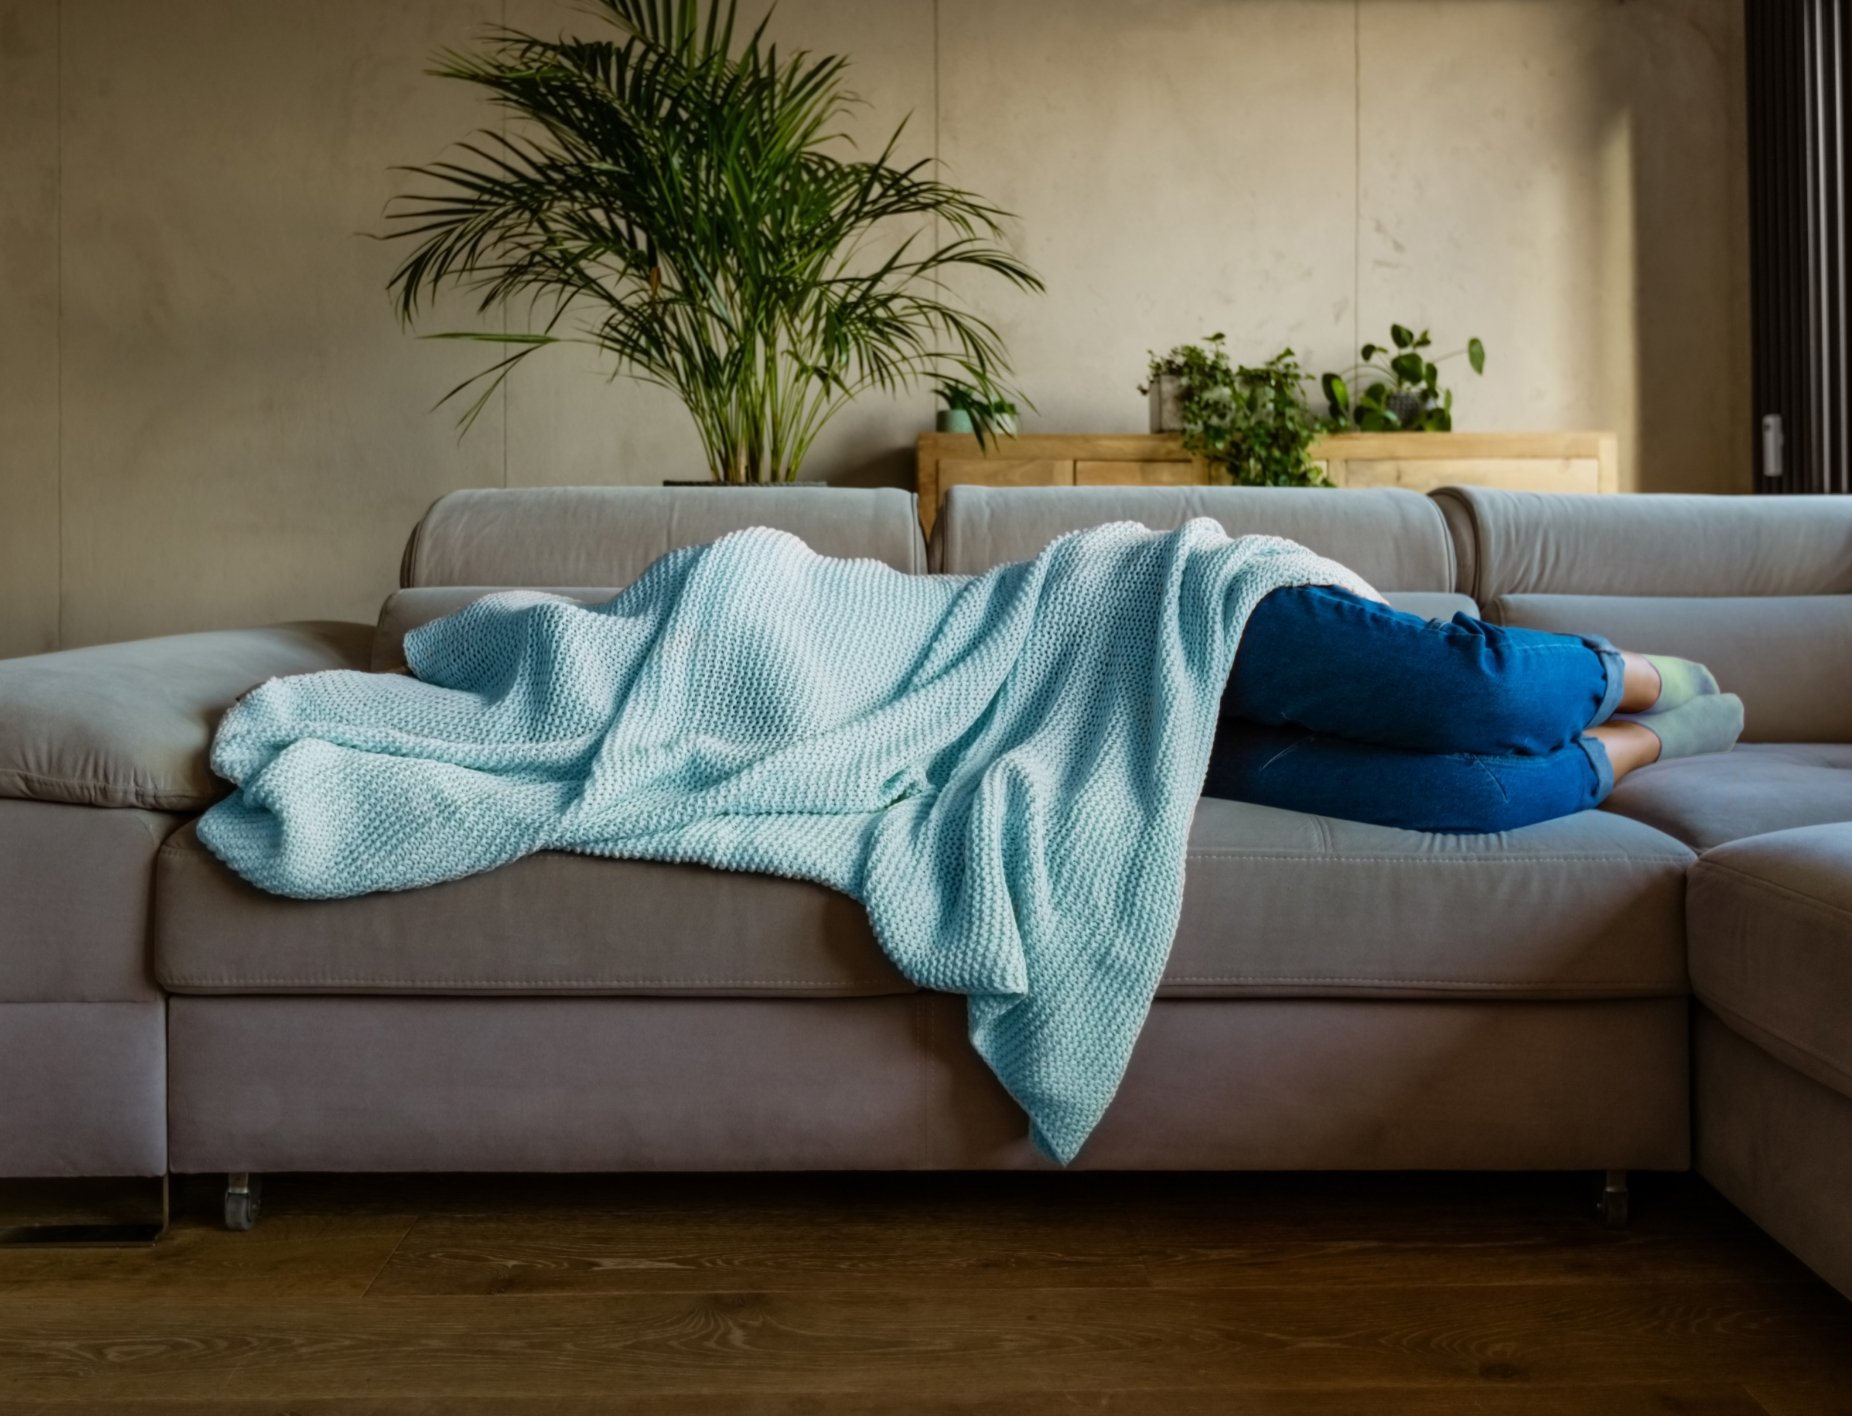 woman-laying-on-couch-under-blanket@2x.jpg